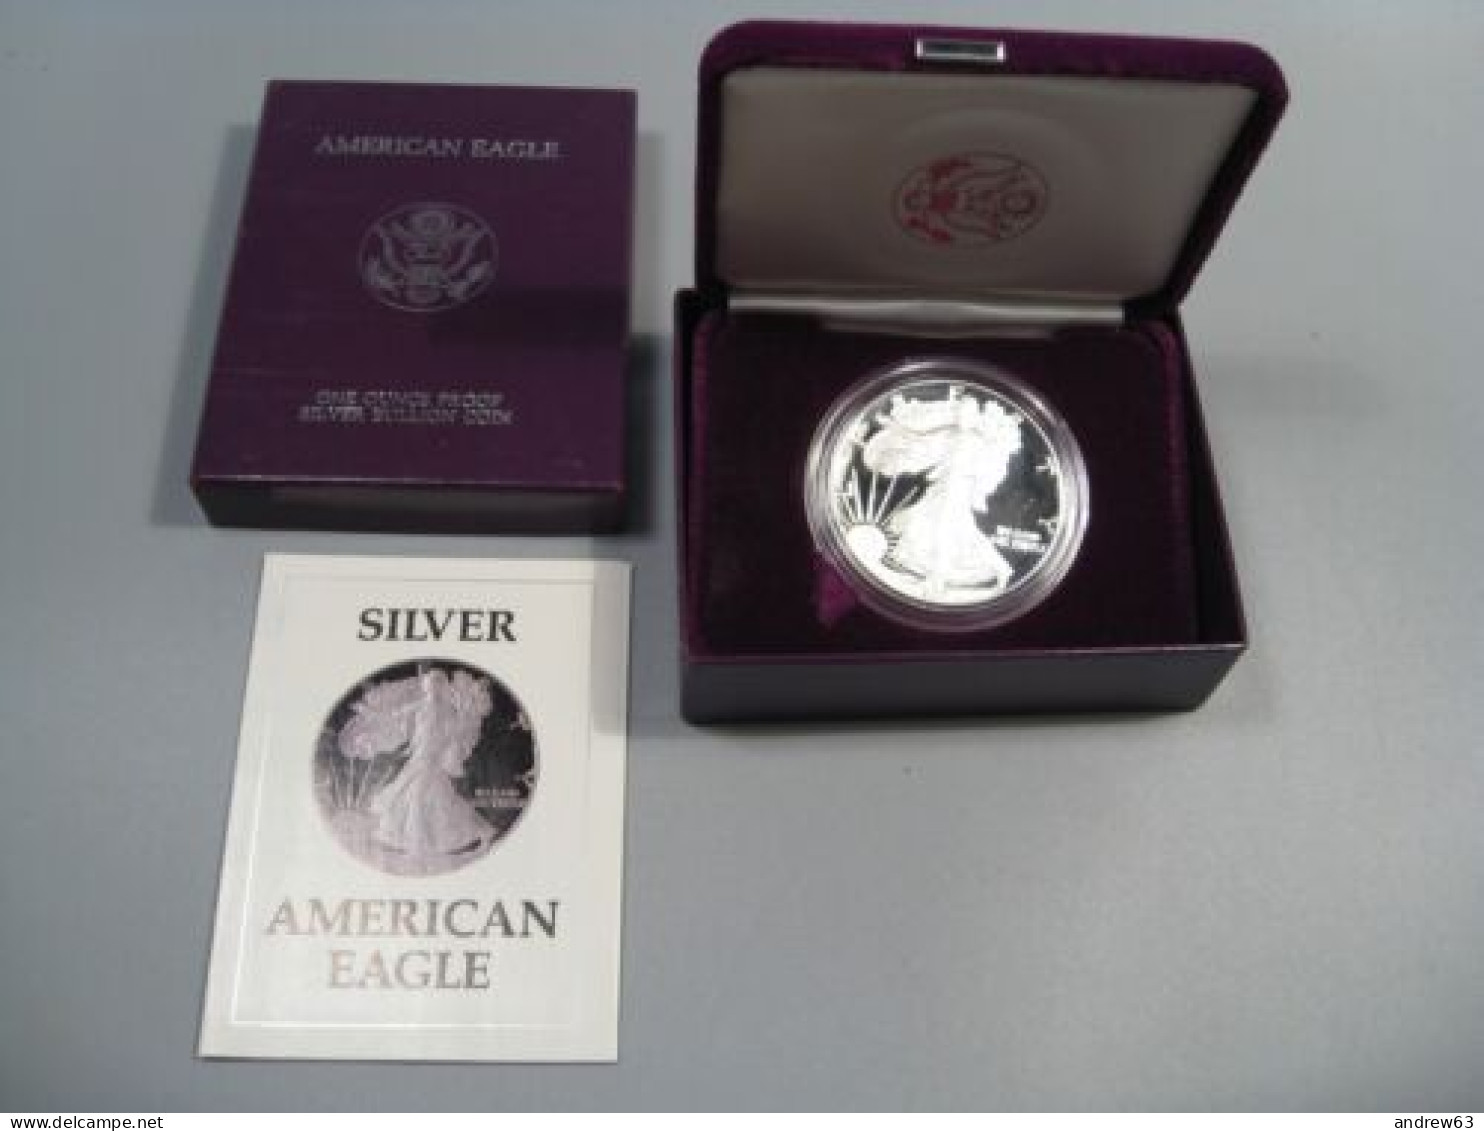 USA - 1993 P - American 1 Oz Silver Eagle Dollar PROOF US Mint With Box & COA - 1979-1999: Anthony